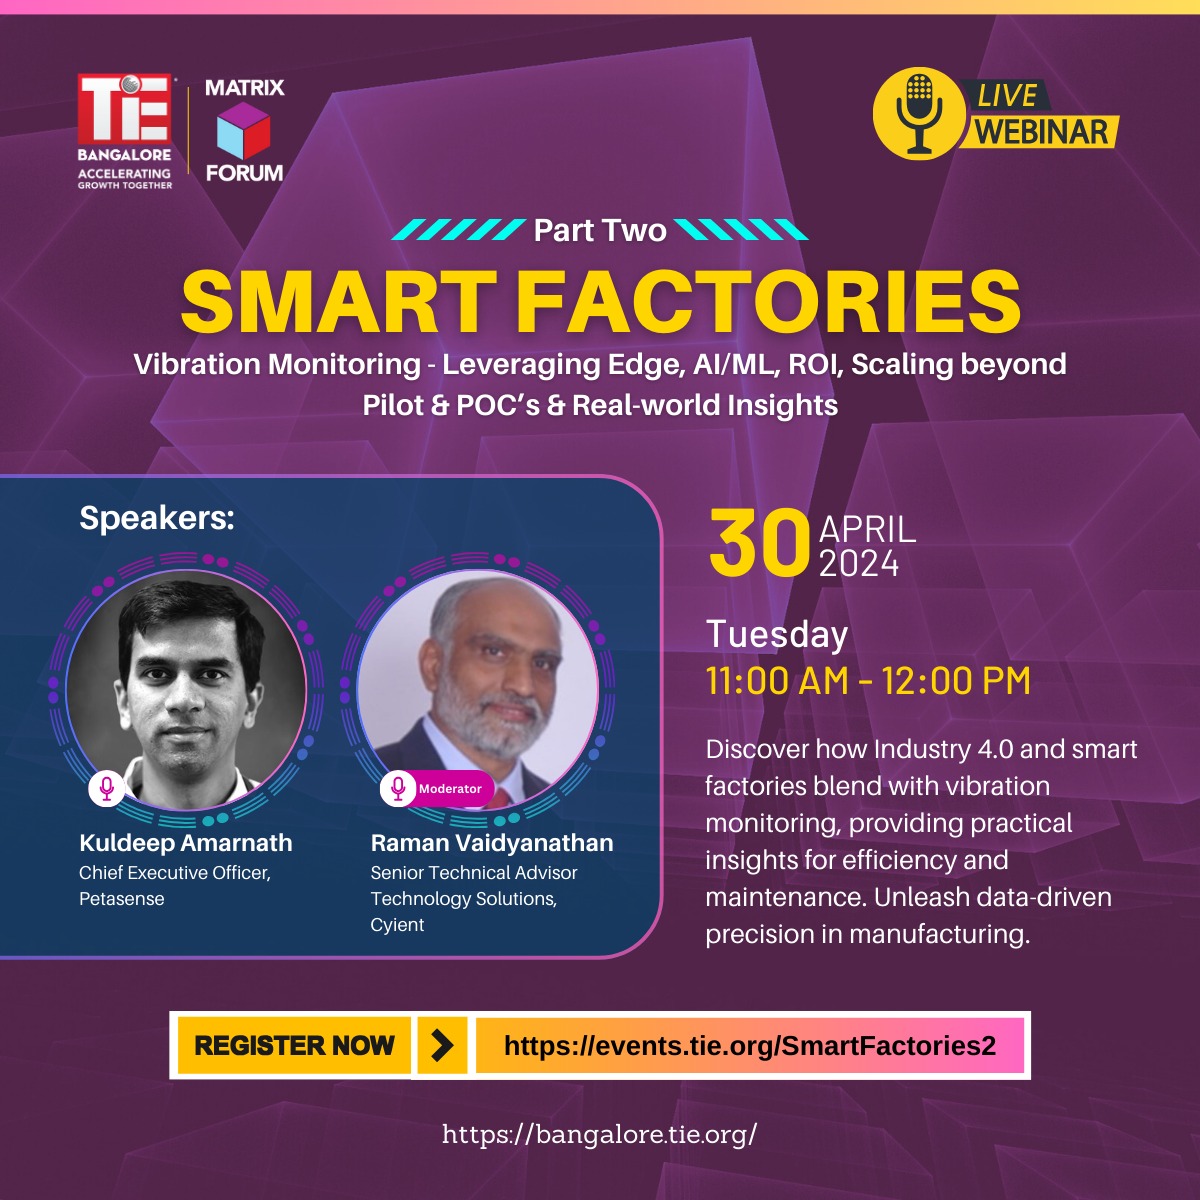 Dive into Smart Factories: Part 2 webinar by @Matrix_Forum at TiE Bangalore! Explore Vibration Monitoring, Edge AI, &more with industry leaders like Kuldeep Amarnath of @Petasense and Raman Vaidyanathan of @Cyient. Don't miss out: events.tie.org/SmartFactories2 #SmartFactories 🏭✨